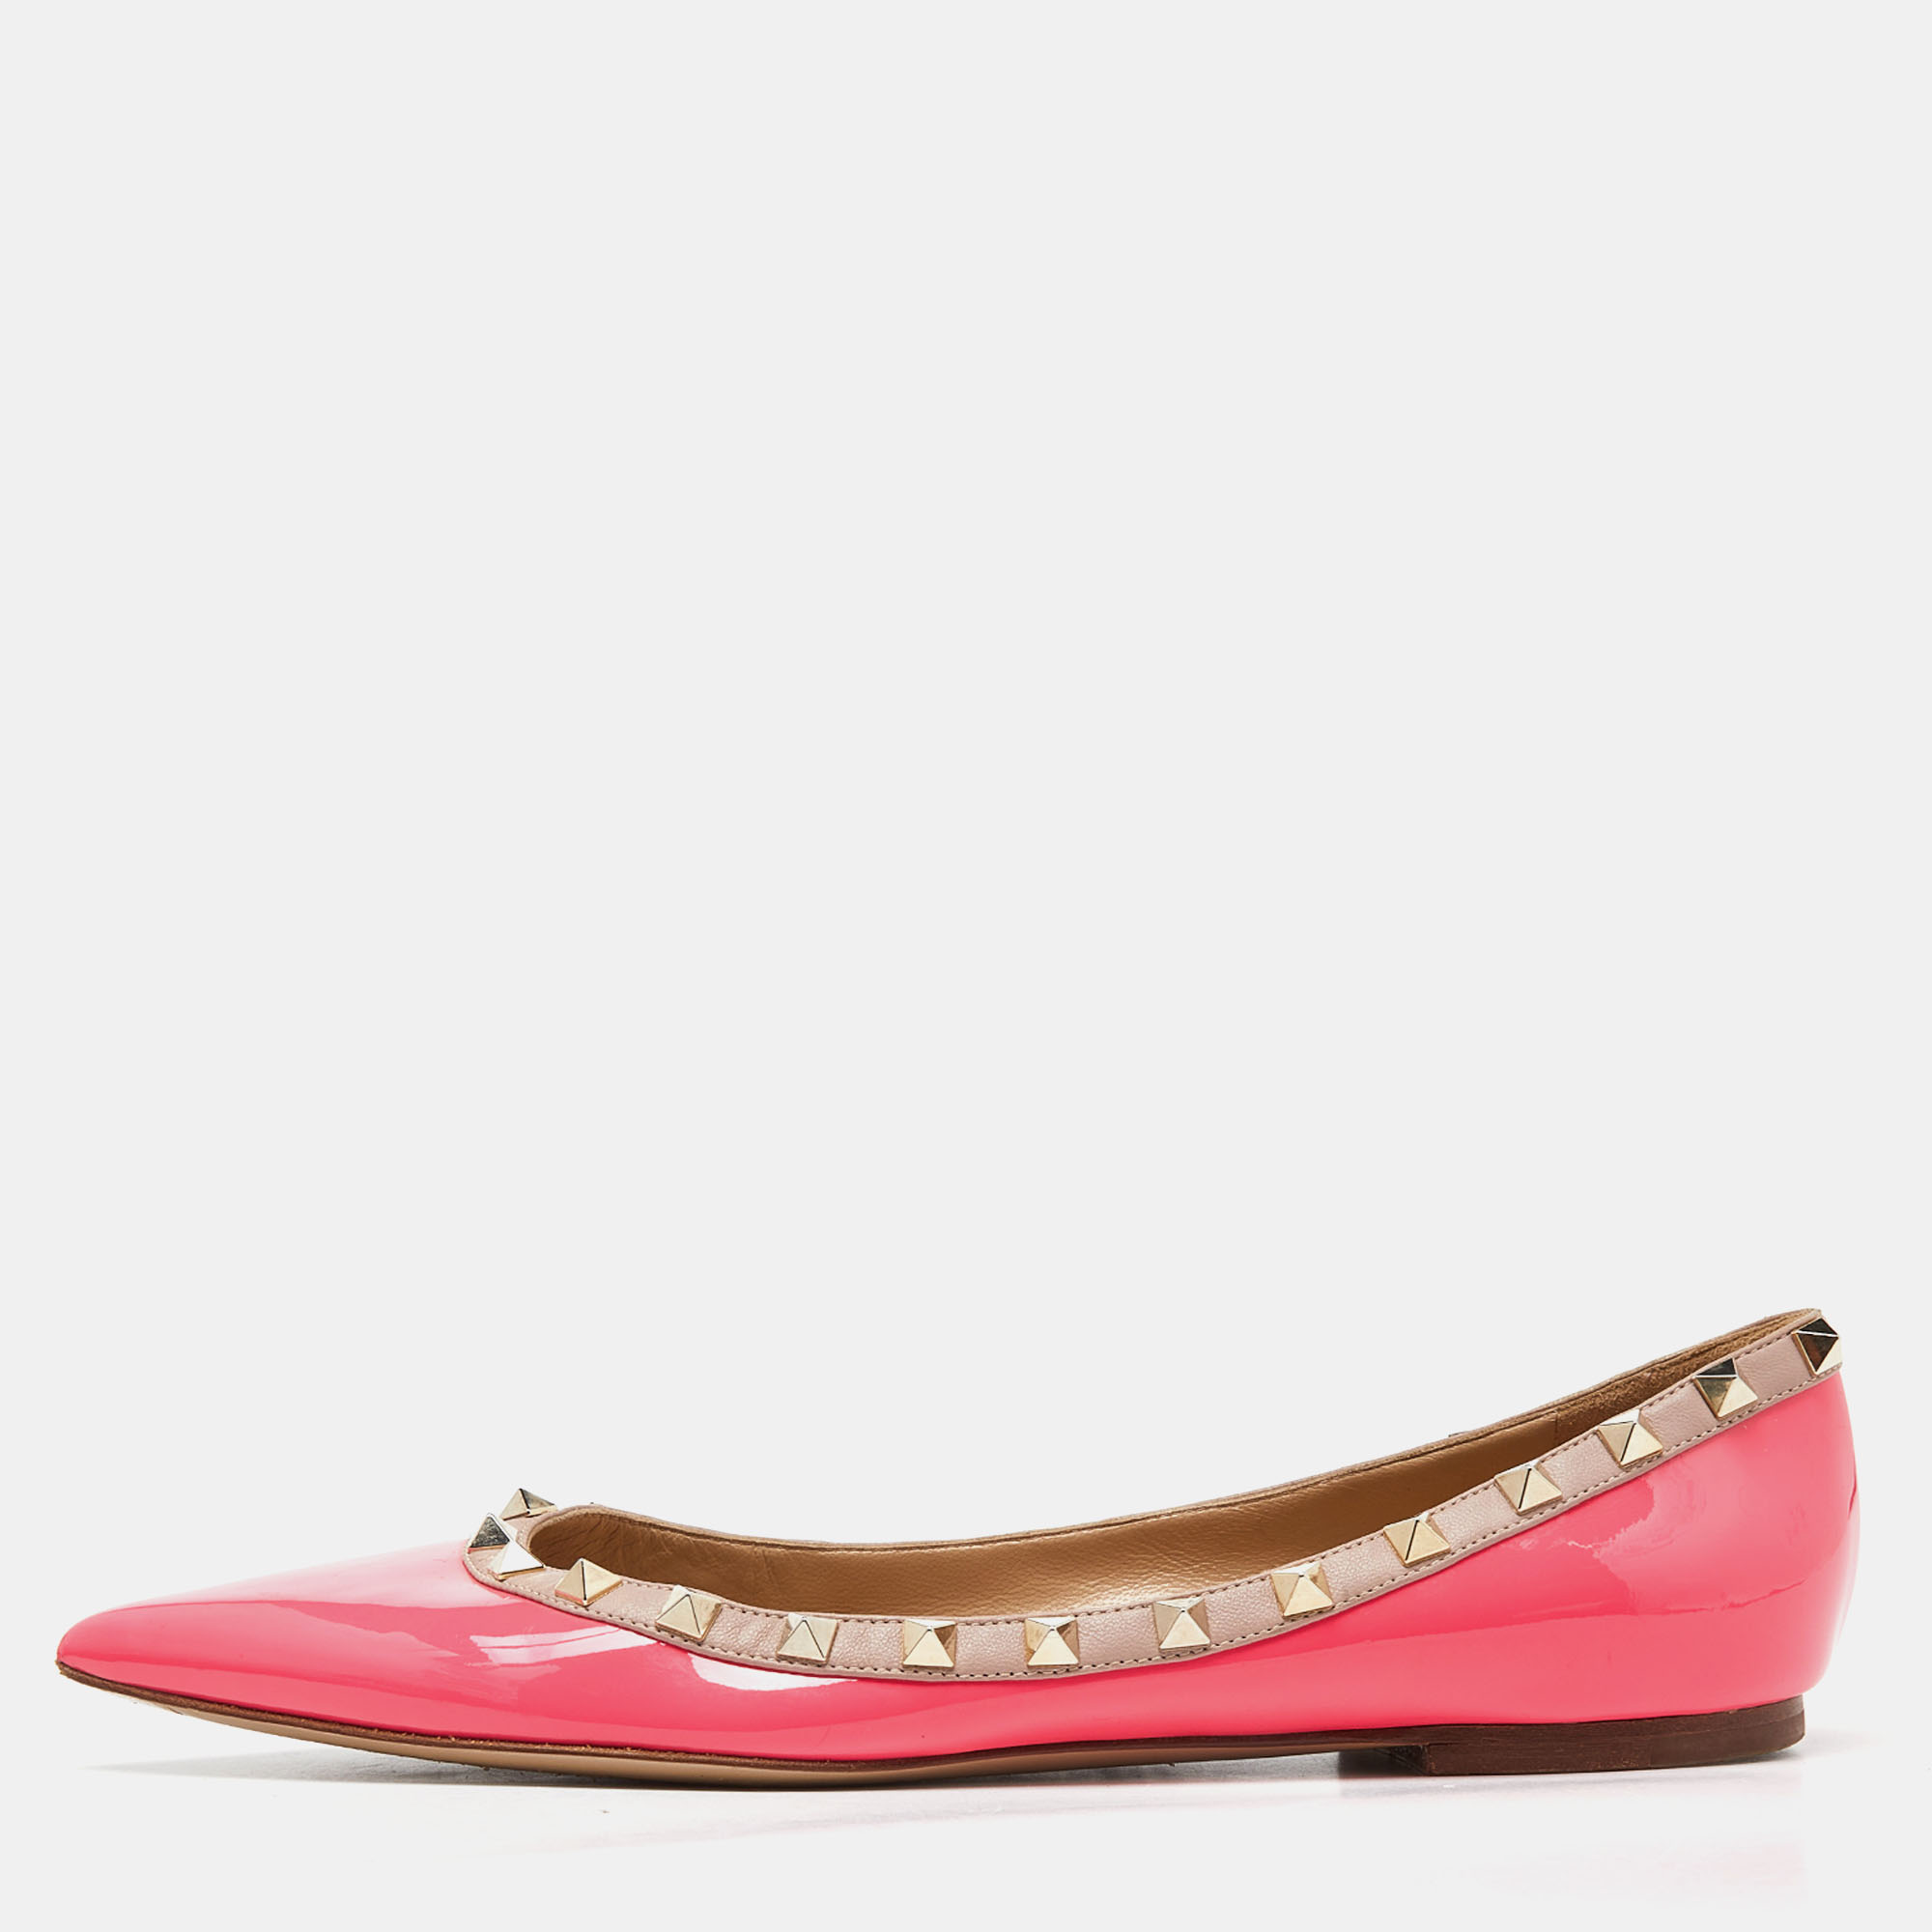 Pre-owned Valentino Garavani Pink/beige Patent Leather Rockstud Pointed Toe Ballet Flats Size 40